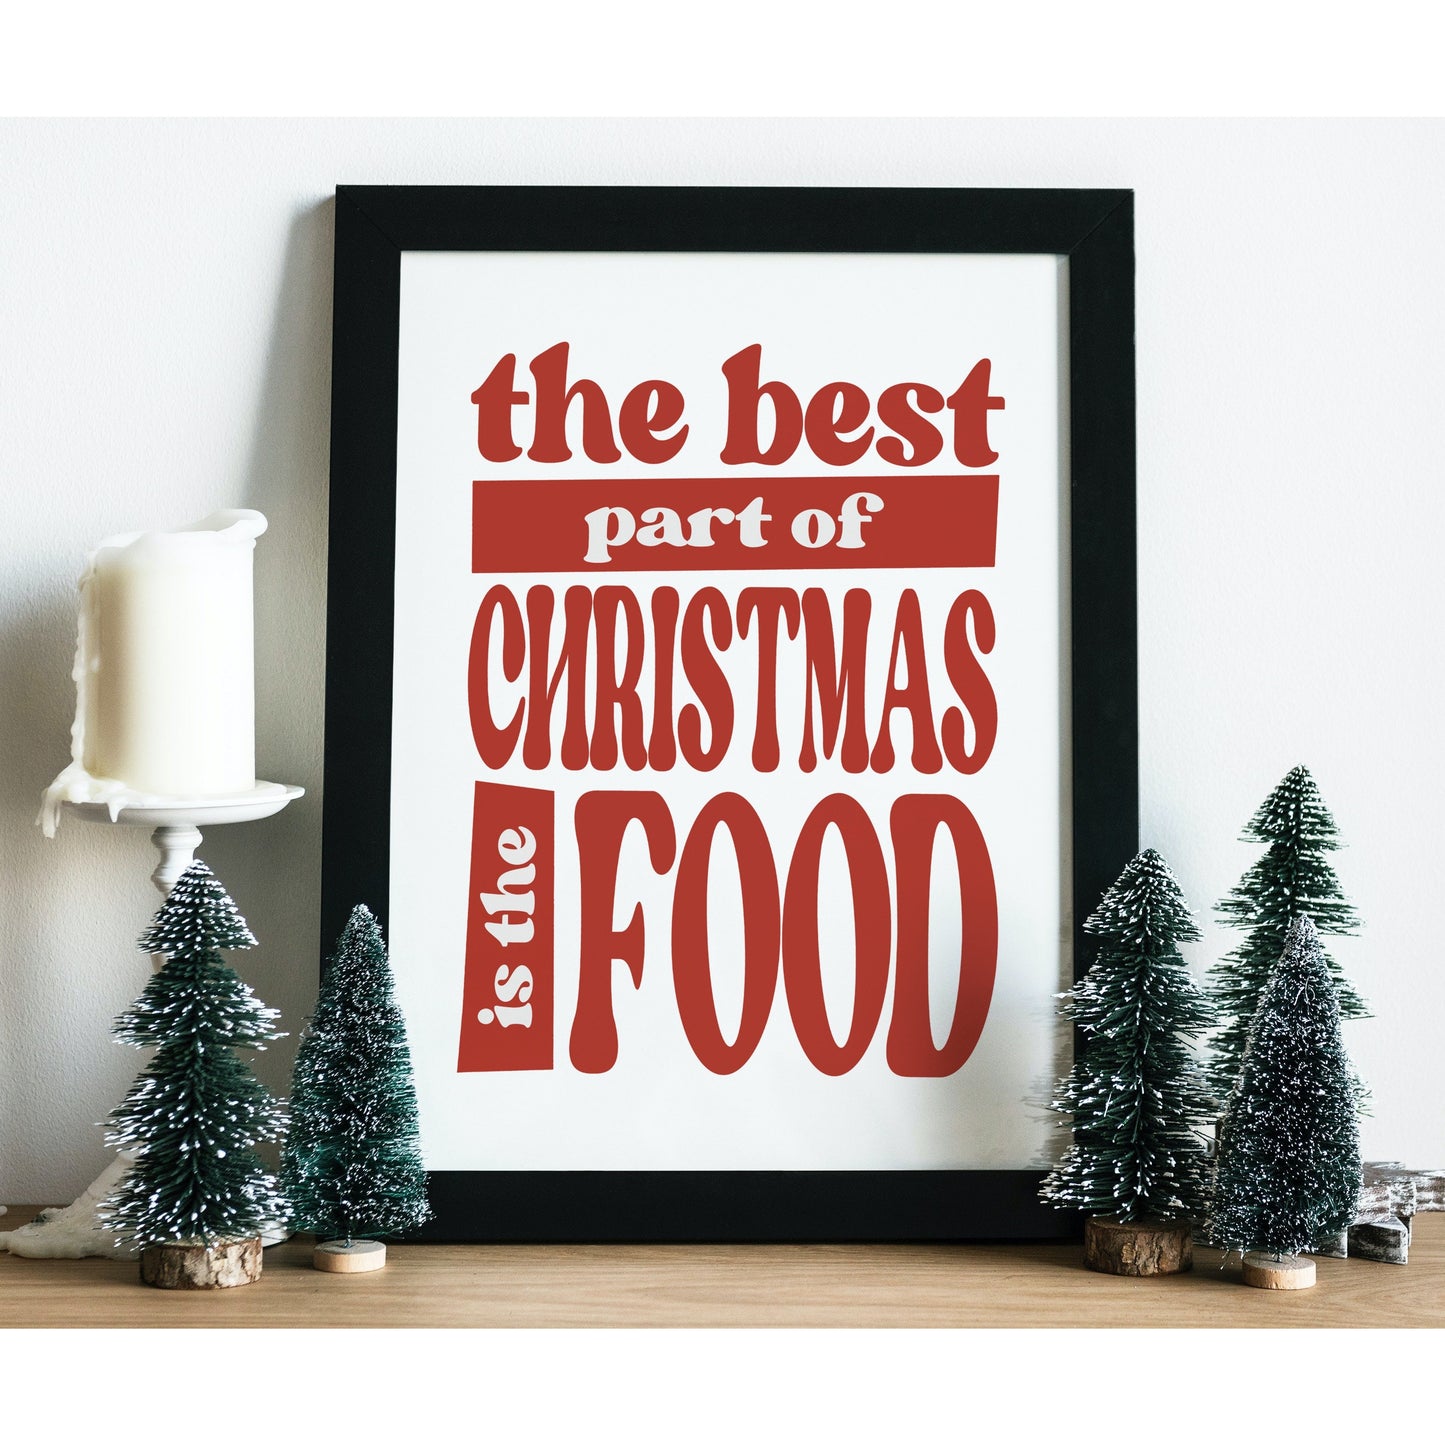 What's the best thing about Christmas? The food, of course! This fun and quirky art print poster features the quote "The best thing about Christmas is the food" in red font. It's perfect for anyone who loves to enjoy all the delicious holiday treats!